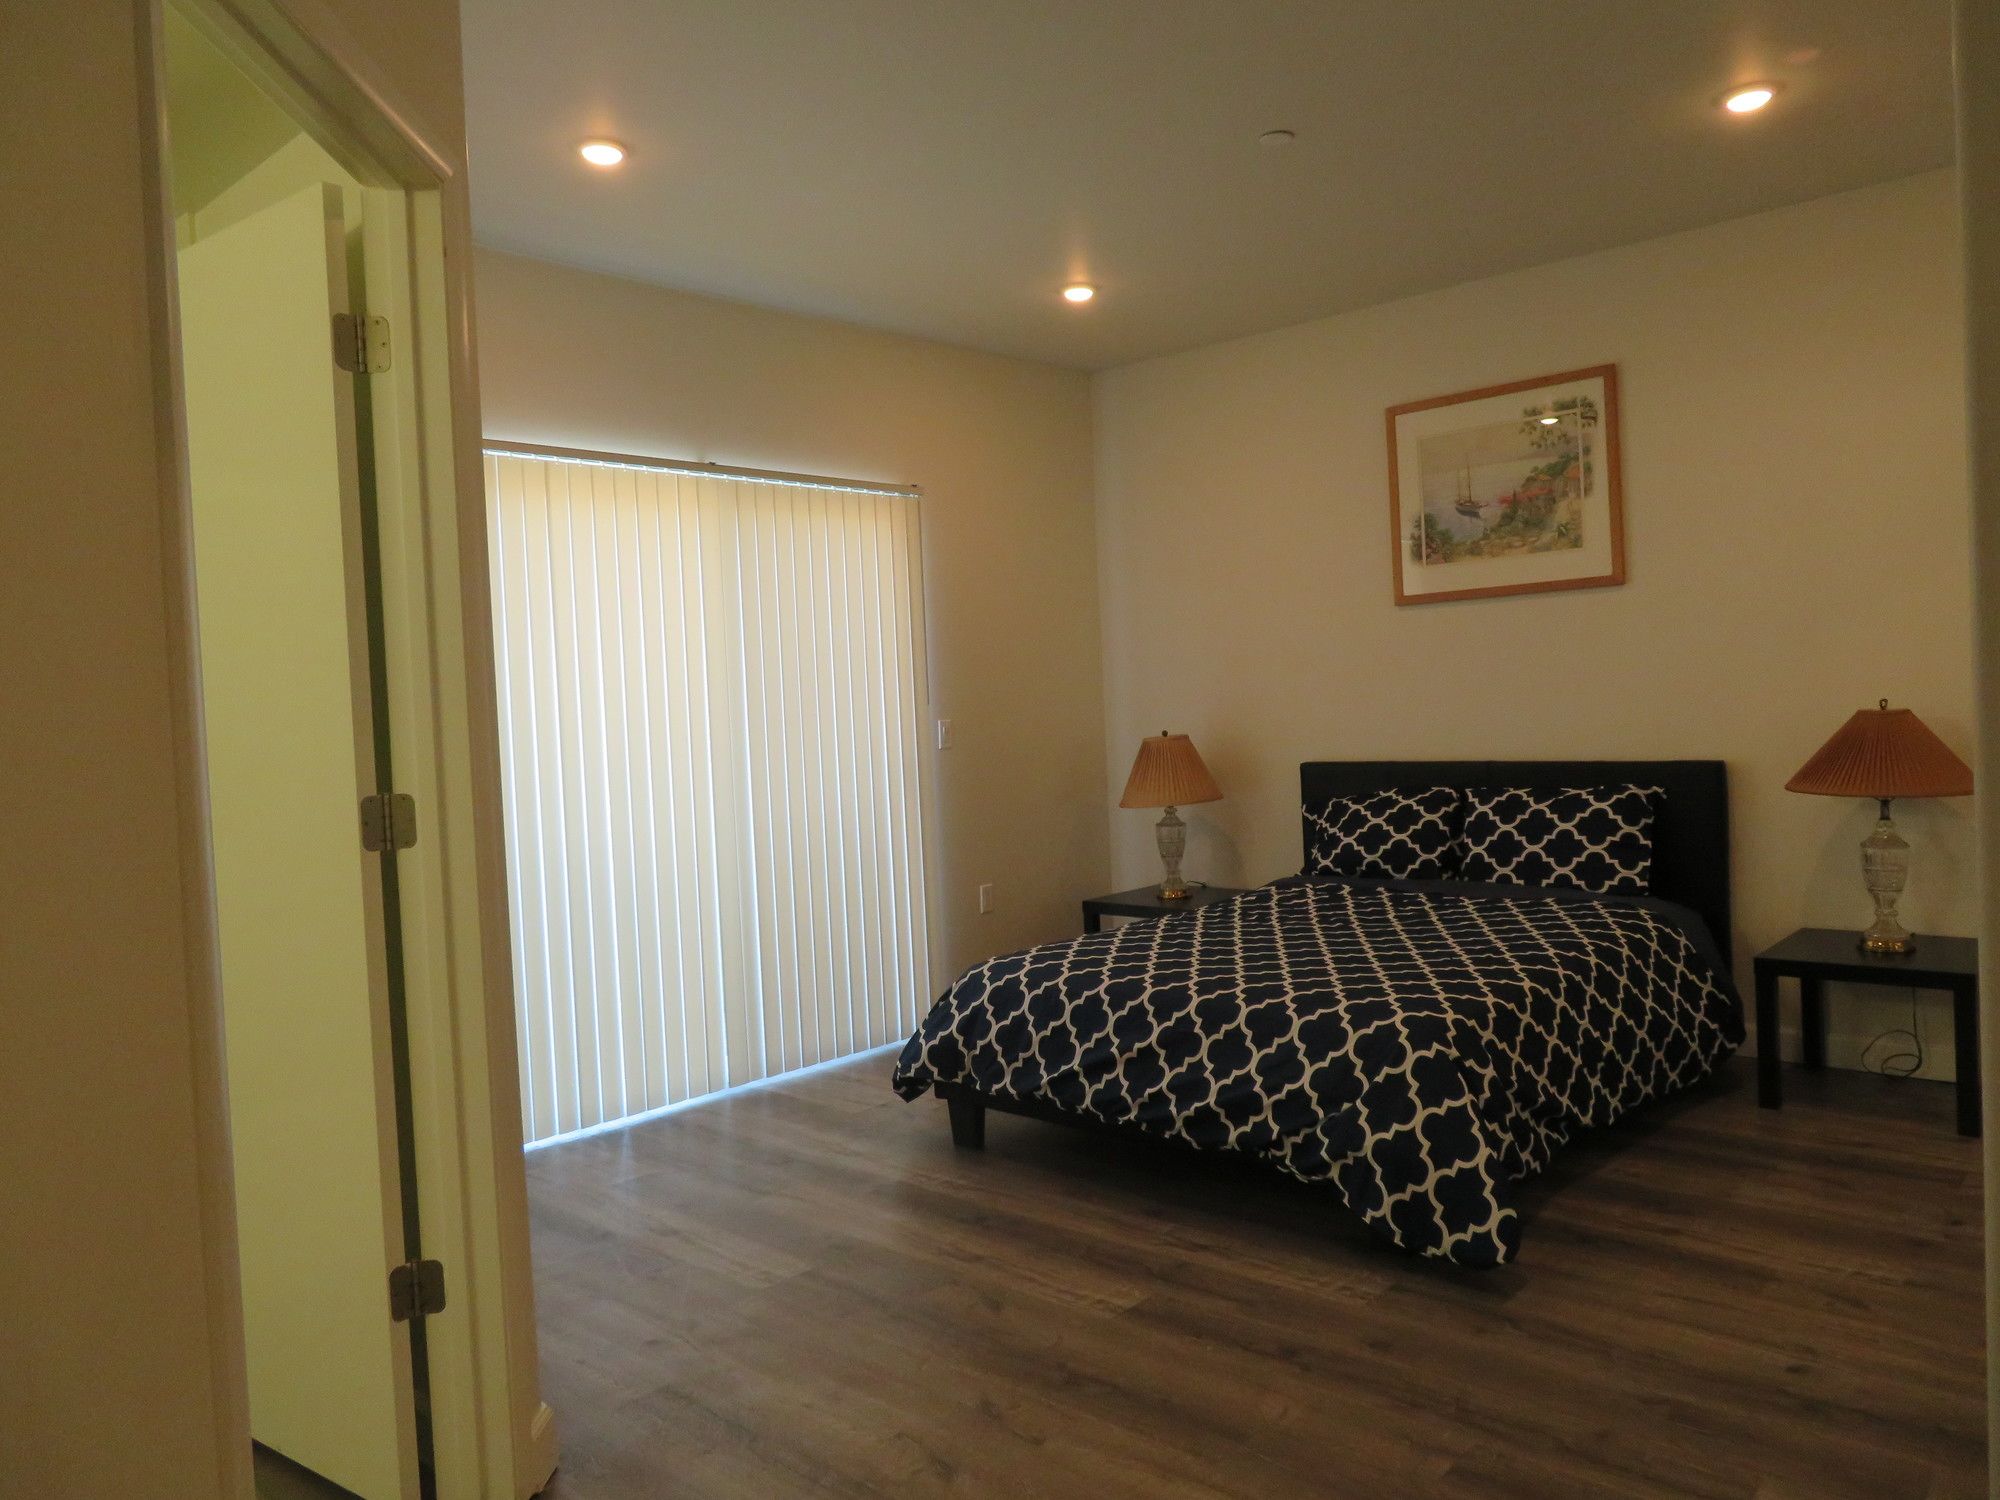 Fully Furnished Apartments near Hollywood